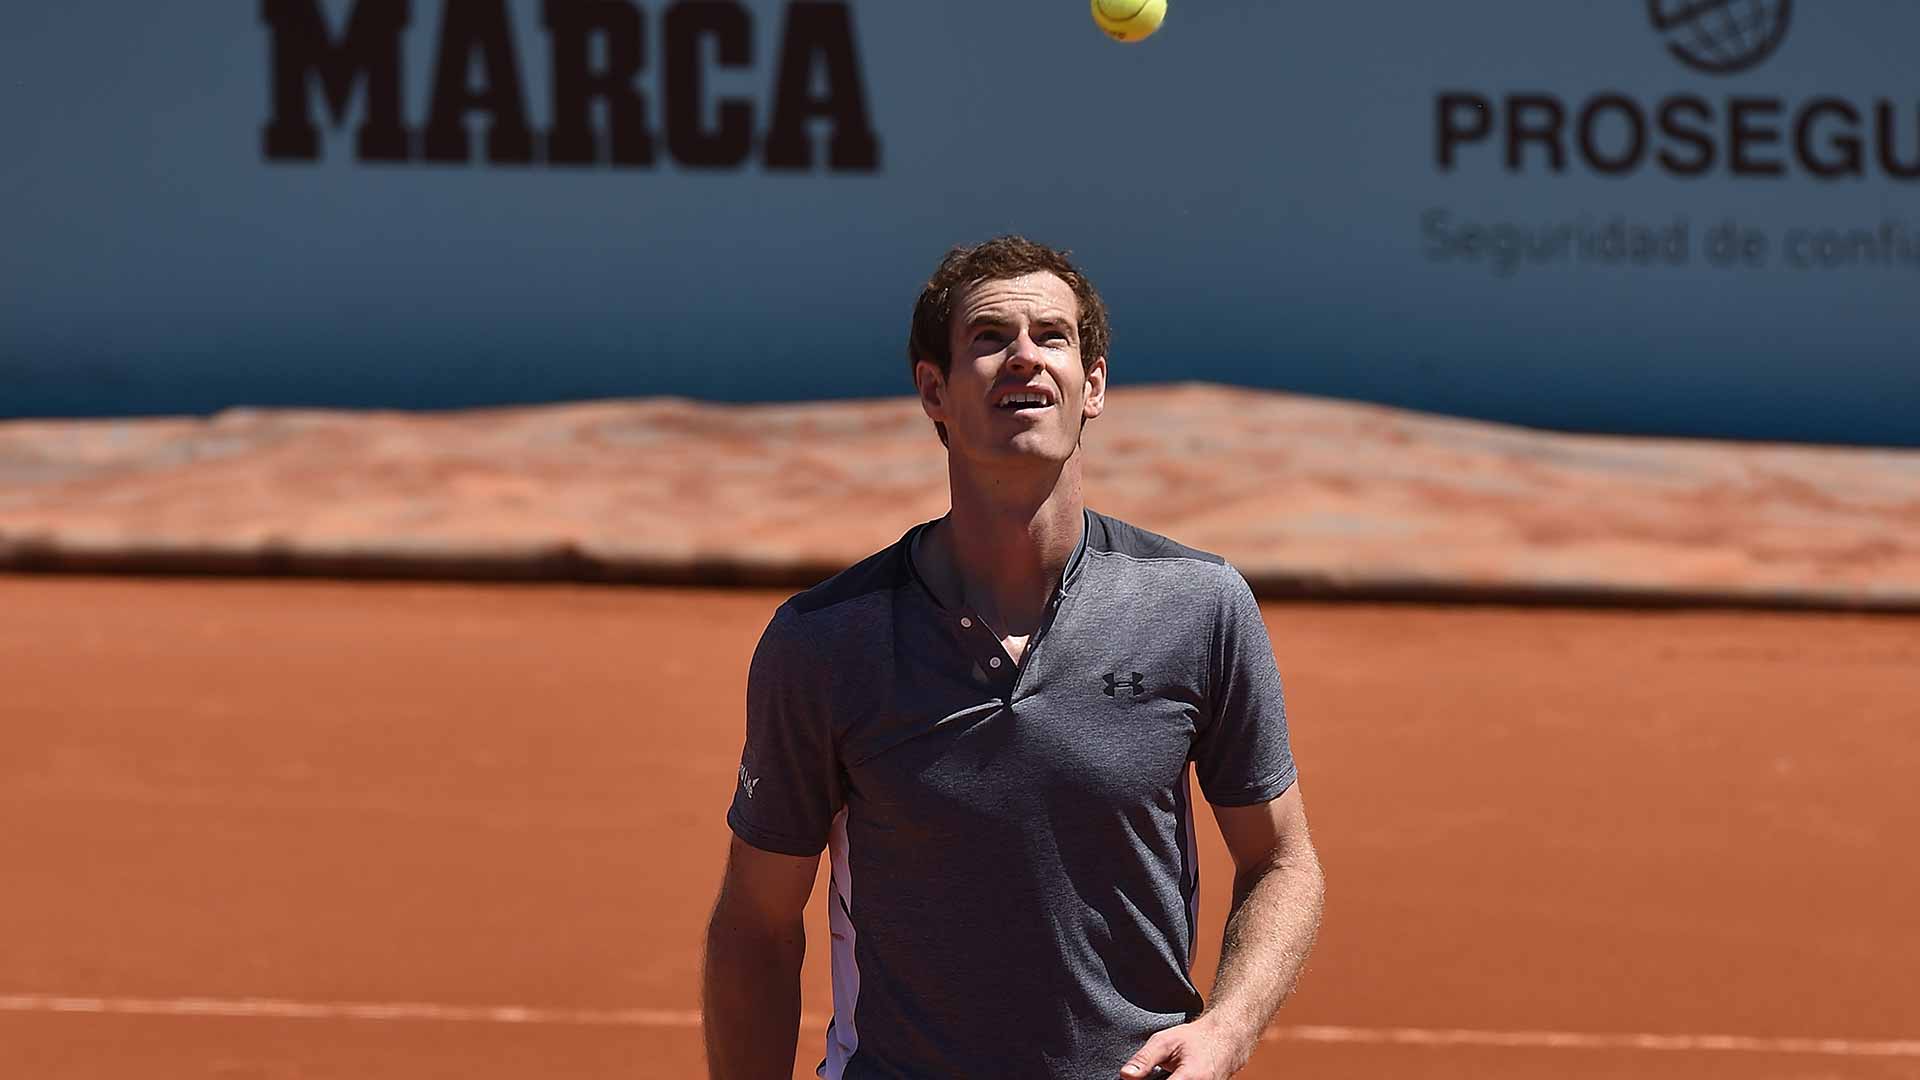 murray-madrid-2017-tuesday-preview